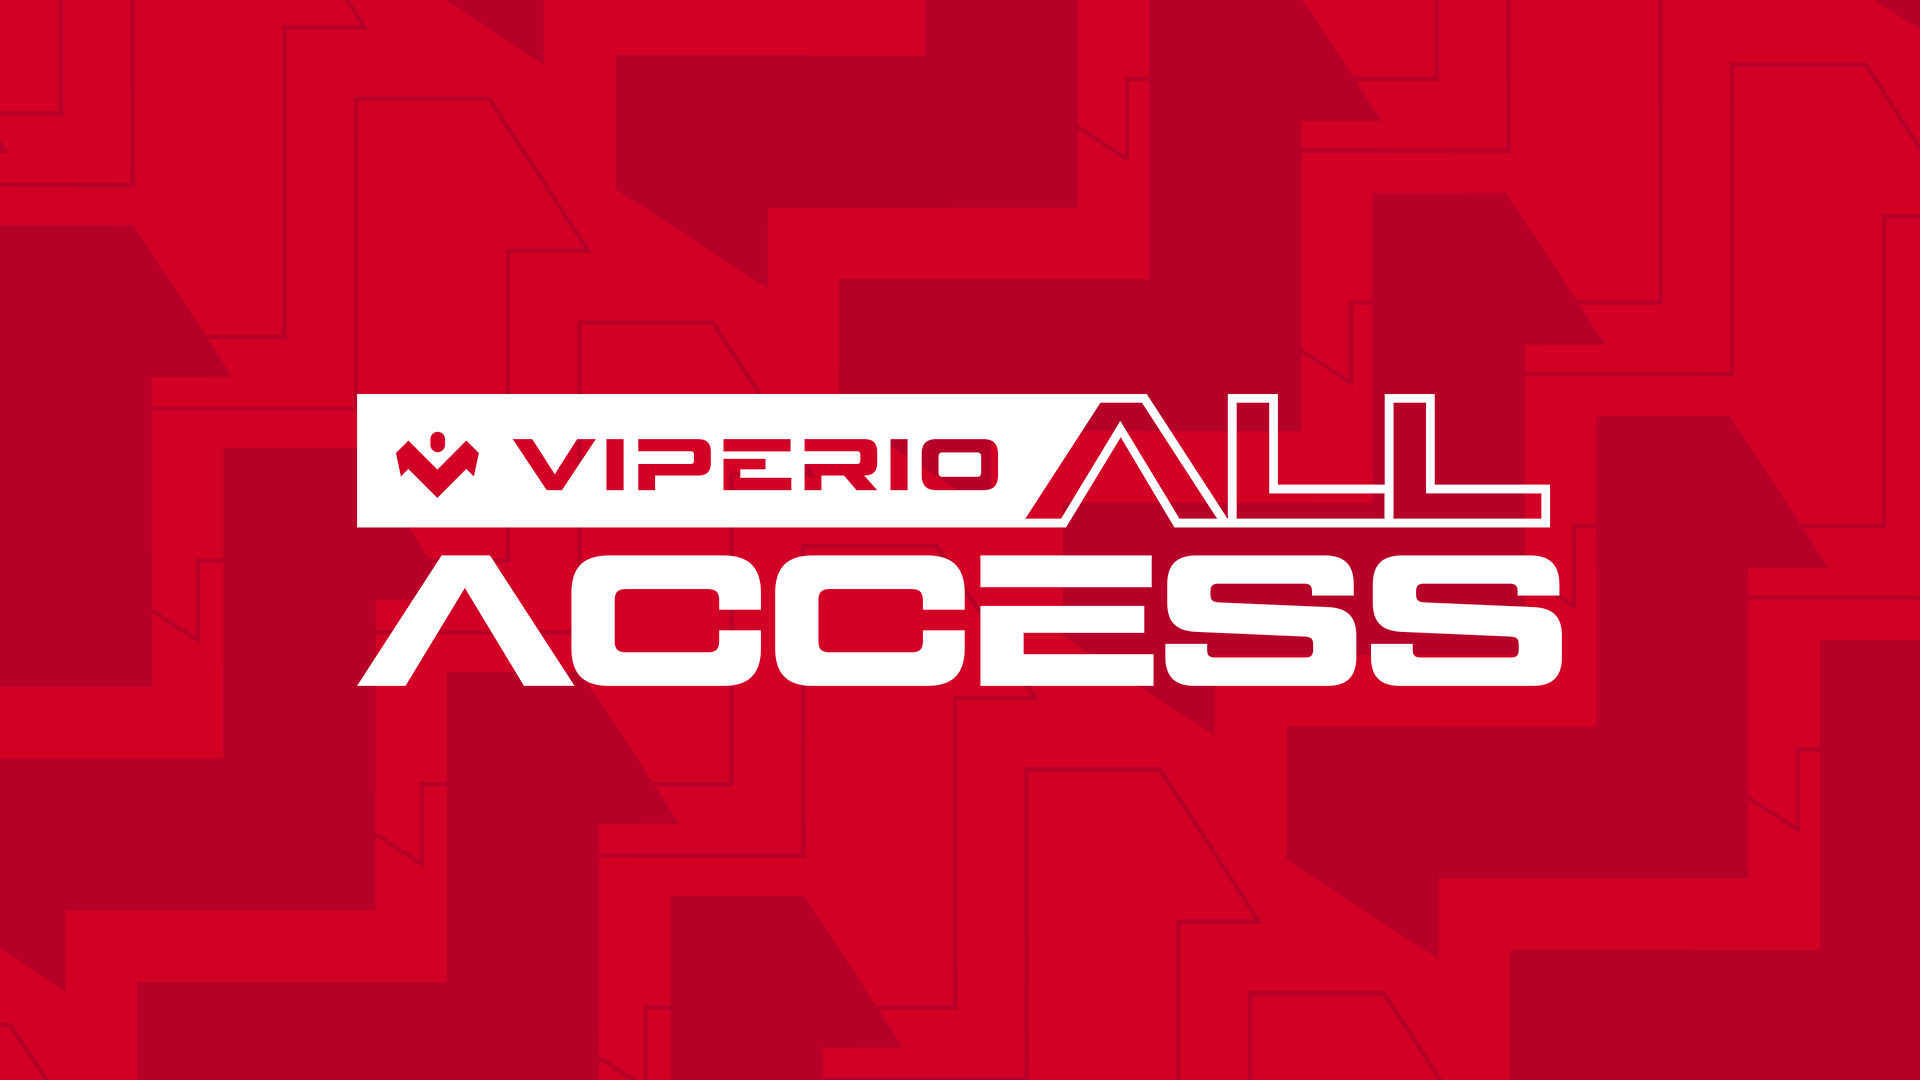 How to watch Viperio All Access LIVE tonight